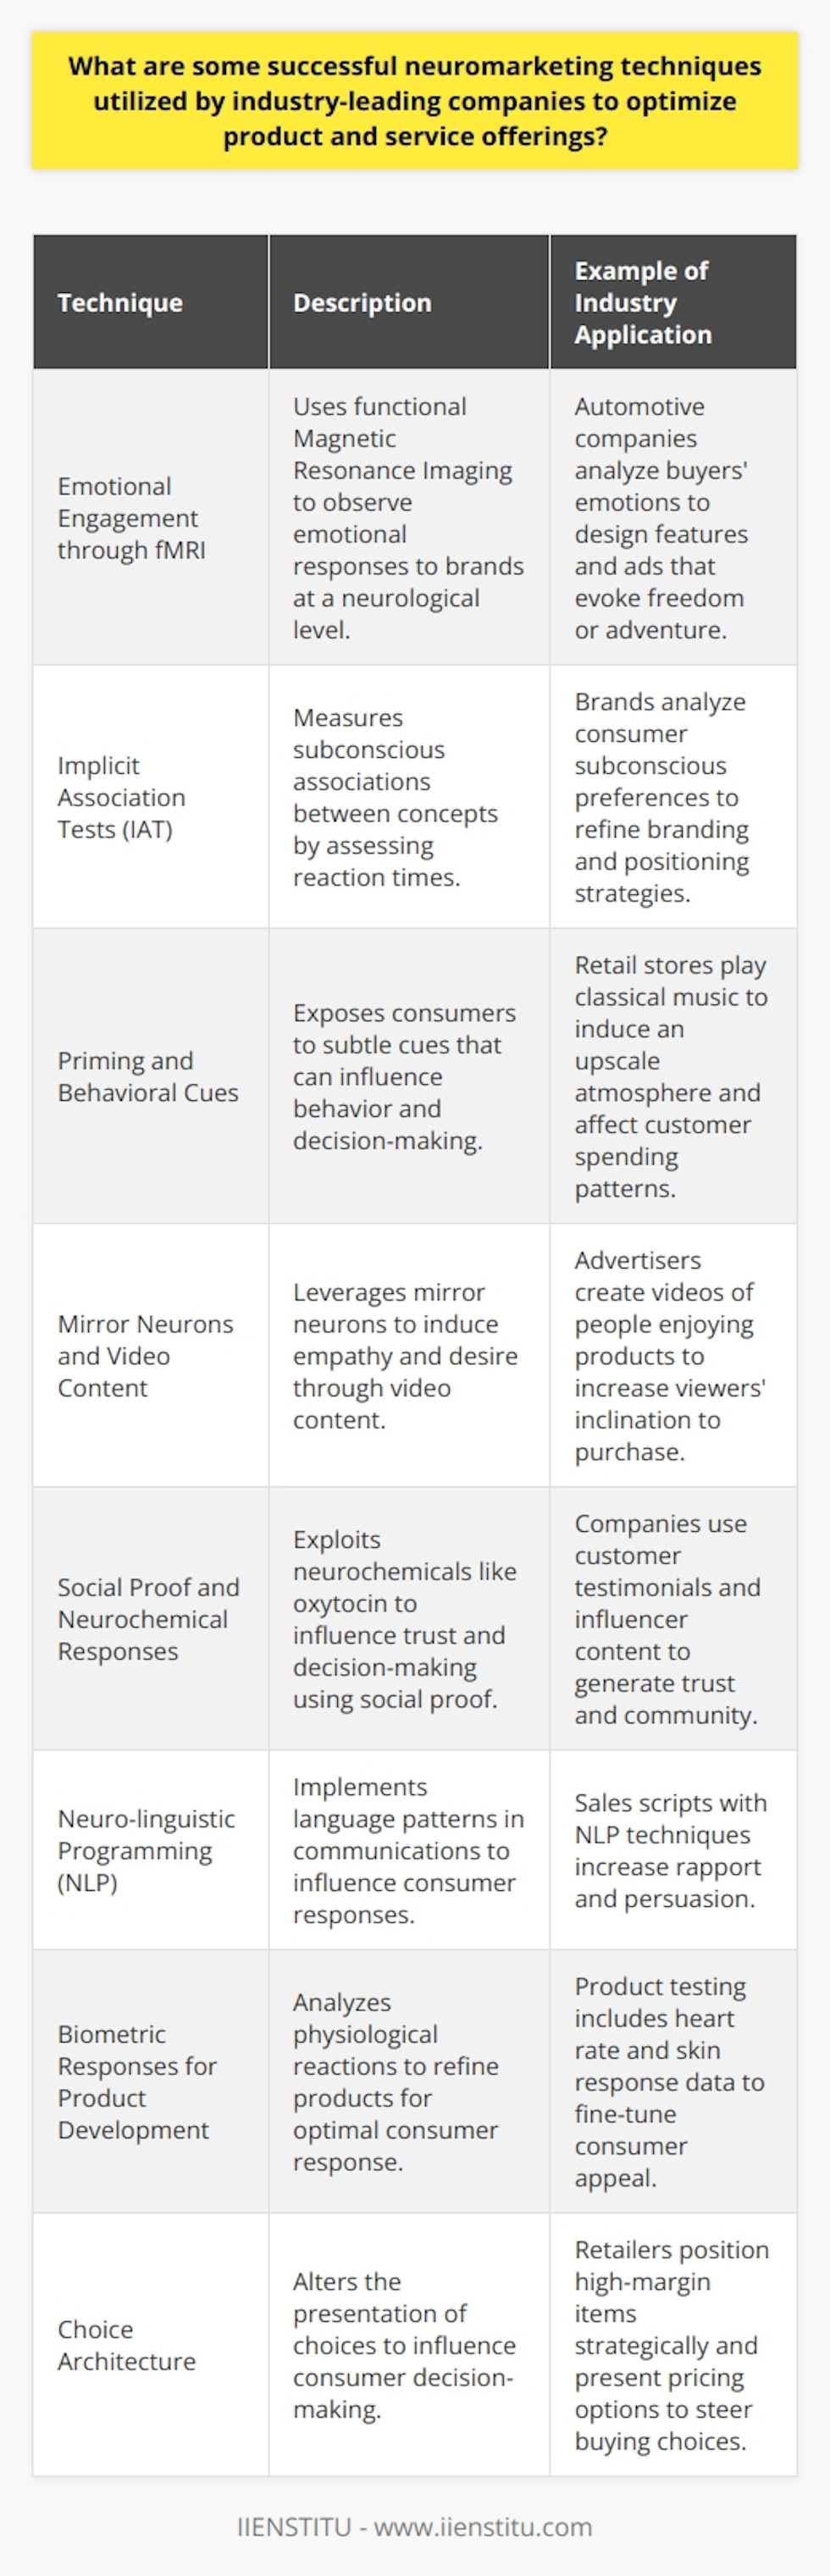 Neuromarketing has emerged as a compelling fusion of marketing and neuroscience, where industry giants harness the science of human behavior to fine-tune their marketing strategies. These tactics aim to pierce through the clutter and resonate deeply with consumers. Here are some innovative neuromarketing techniques that have been successfully implemented by top companies:1. **Emotional Engagement through fMRI**: By analyzing brain activity with functional Magnetic Resonance Imaging (fMRI), companies can see how consumers emotionally engage with brands at a neurological level. This technology allows them to tailor advertisements and product experiences to trigger the desired emotional response, which could be anything from joy and trust to excitement and curiosity. For instance, the automotive industry uses fMRI results to design vehicle features and ad campaigns that elicit a sense of freedom or adventure, appealing to the emotional drivers of their target audience.2. **Implicit Association Tests (IAT)**: This test measures the strength of associations people have between concepts, such as a brand and its attributes, by recording reaction times. By using IAT, companies can gauge consumers' subconscious preferences, which might contradict their explicitly stated opinions. These insights are invaluable in fine-tuning branding and positioning strategies to align with the implicit perceptions and attitudes of the market.3. **Priming and Behavioral Cues**: Subtly exposing consumers to certain words, images, or sensory cues can influence behavior and decision-making. For instance, a retail store might play classical music or disseminate a light, pleasing scent to induce a high-end atmosphere, priming customers to perceive the products as more luxurious and thus be willing to spend more.4. **Mirror Neurons and Video Content**: Companies exploit the human brain's mirror neurons, which fire when we observe others experiencing something. By crafting video content that showcases people enjoying or benefiting from a product, viewers are more likely to empathize and imagine themselves in similar situations, increasing the desire to purchase.5. **Social Proof and Neurochemical Responses**: Understanding how neurochemicals like oxytocin, which is associated with trust and bonding, affect decision-making is key in harnessing social proof. Companies leverage customer testimonials, influencer partnerships, and user-generated content to trigger a sense of community and trust, influencing buying behavior.6. **Neuro-linguistic Programming (NLP)**: NLP techniques are sometimes woven into sales scripts and customer service protocols to build rapport and influence consumer responses. By using language patterns that appeal to different sensory modalities, marketers can communicate more effectively and increase the persuasive power of their messages.7. **Biometric Responses for Product Development**: Heart rate, galvanic skin response, and other biometric data are collected during product testing to measure the intensity of consumers' physiological reactions, helping developers refine products to elicit the most favorable responses.8. **Choice Architecture**: Arranging the way choices are presented can hugely affect consumer decisions. Retailers often use this technique in pricing and product placement, such as positioning high-margin items at eye level or framing pricing options in a way that nudges consumers towards a particular choice.The consistent thread across these neuromarketing techniques is the focus on understanding and influencing the subconscious processes that govern consumer behavior. By harnessing the rich data provided by neuroscience, industry leaders craft marketing strategies that not only engage the conscious mind but also appeal to the undercurrents of human emotion and cognition that drive purchasing decisions.